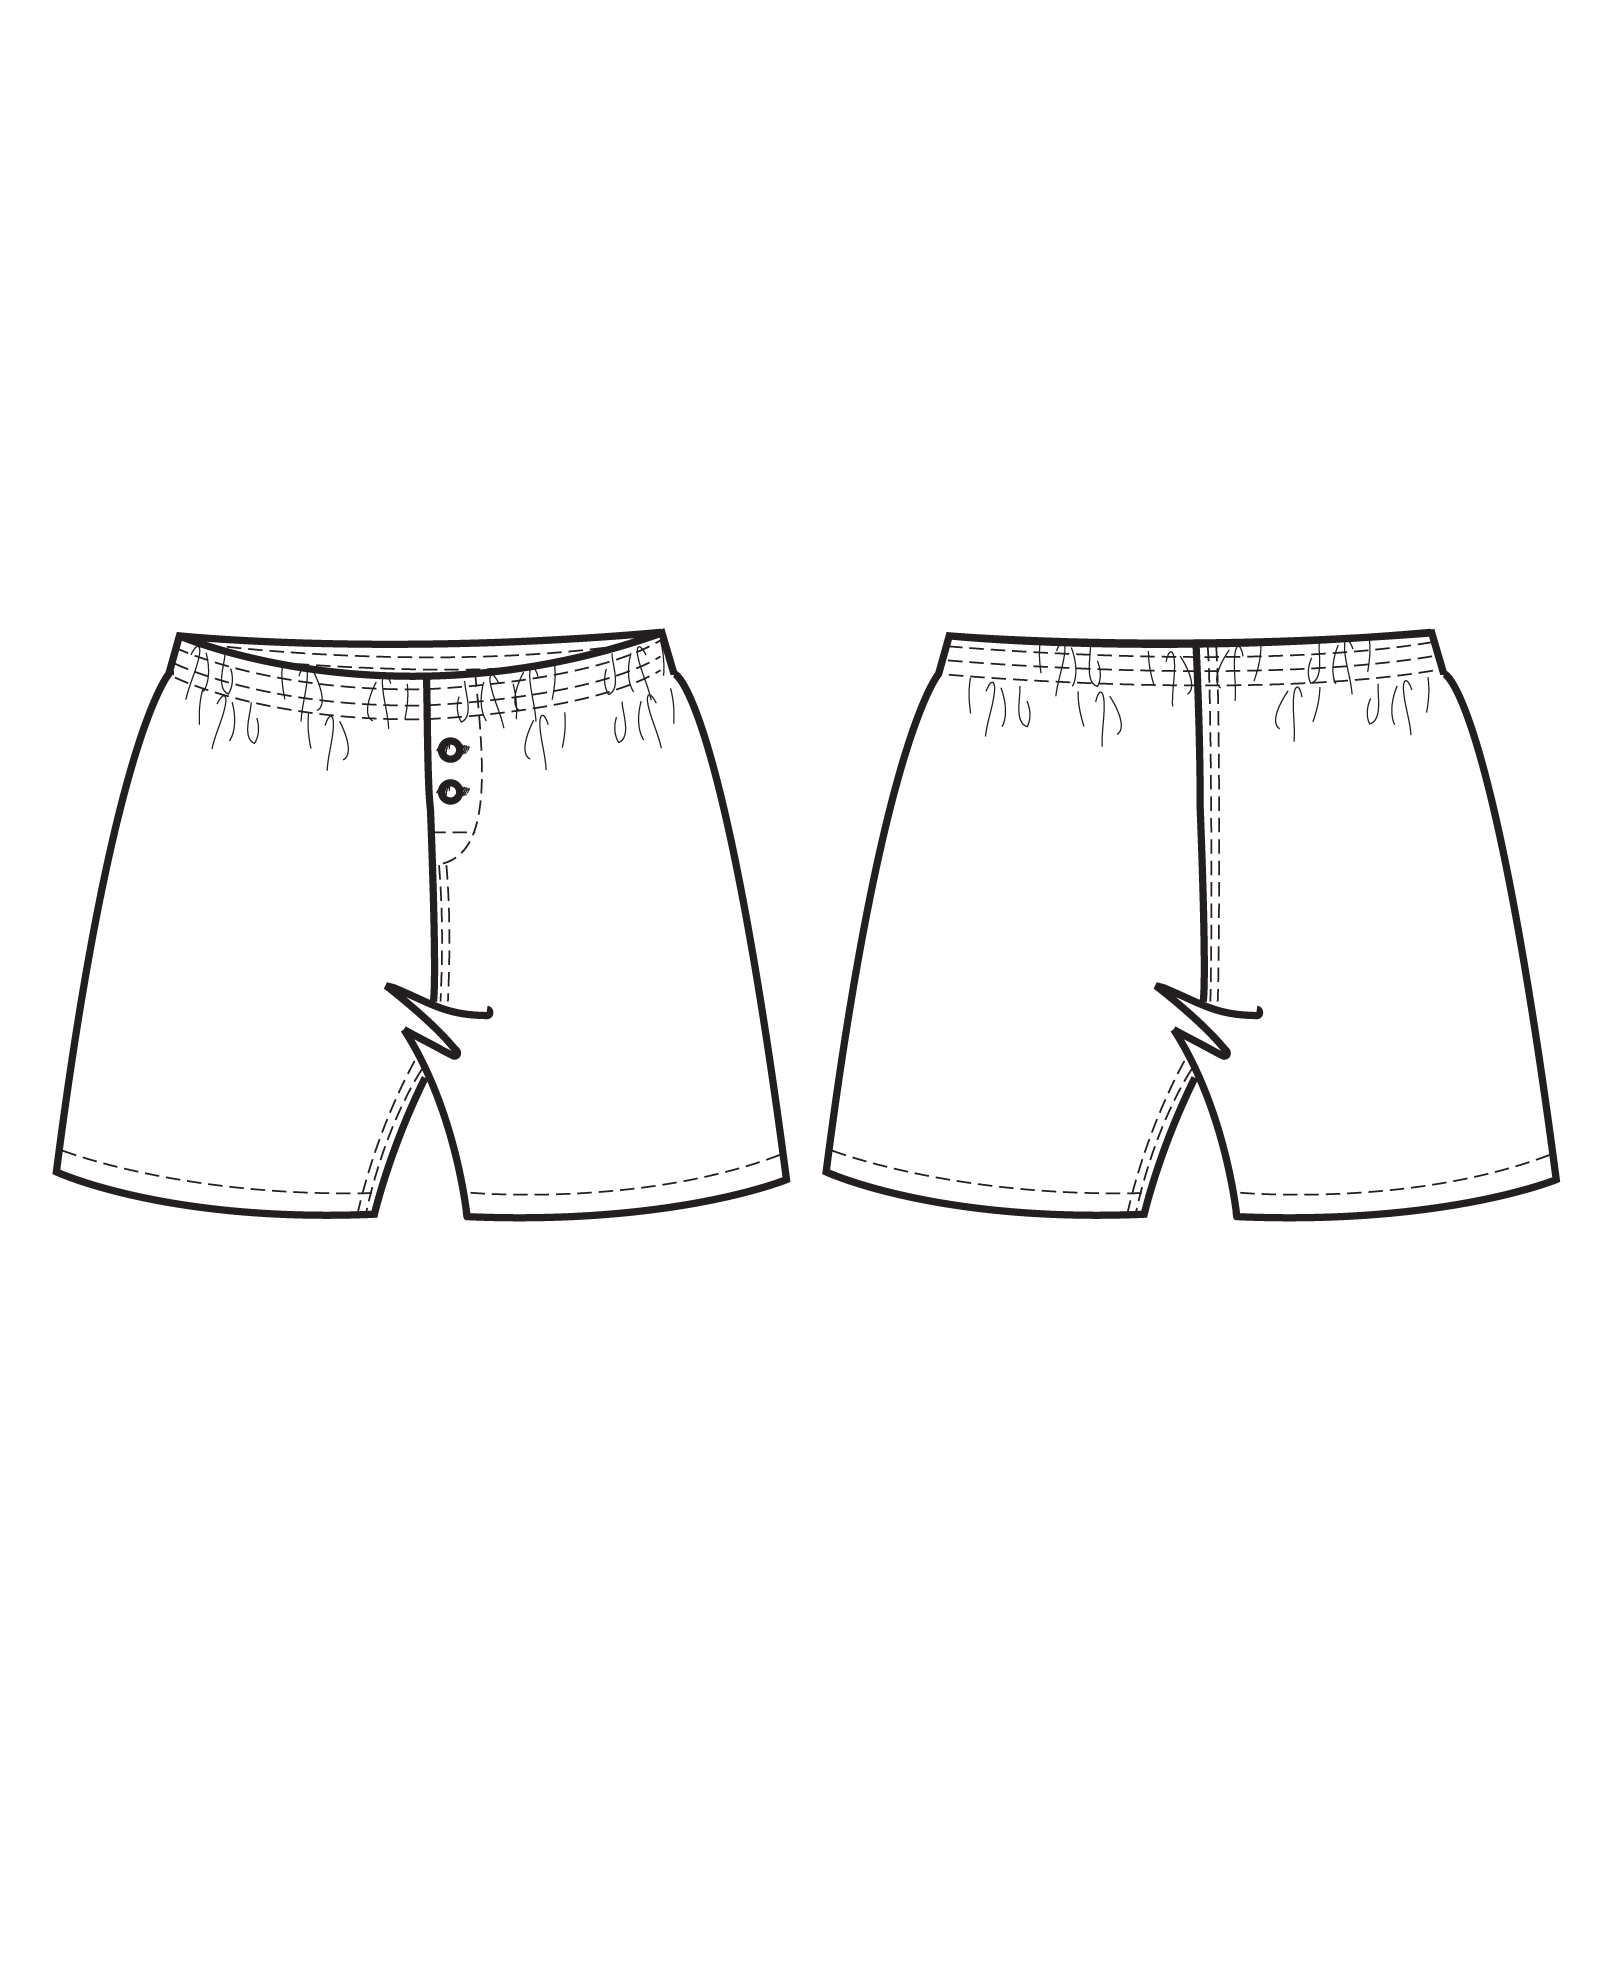 The Bingley Boxer Shorts – Measure Twice Cut Once